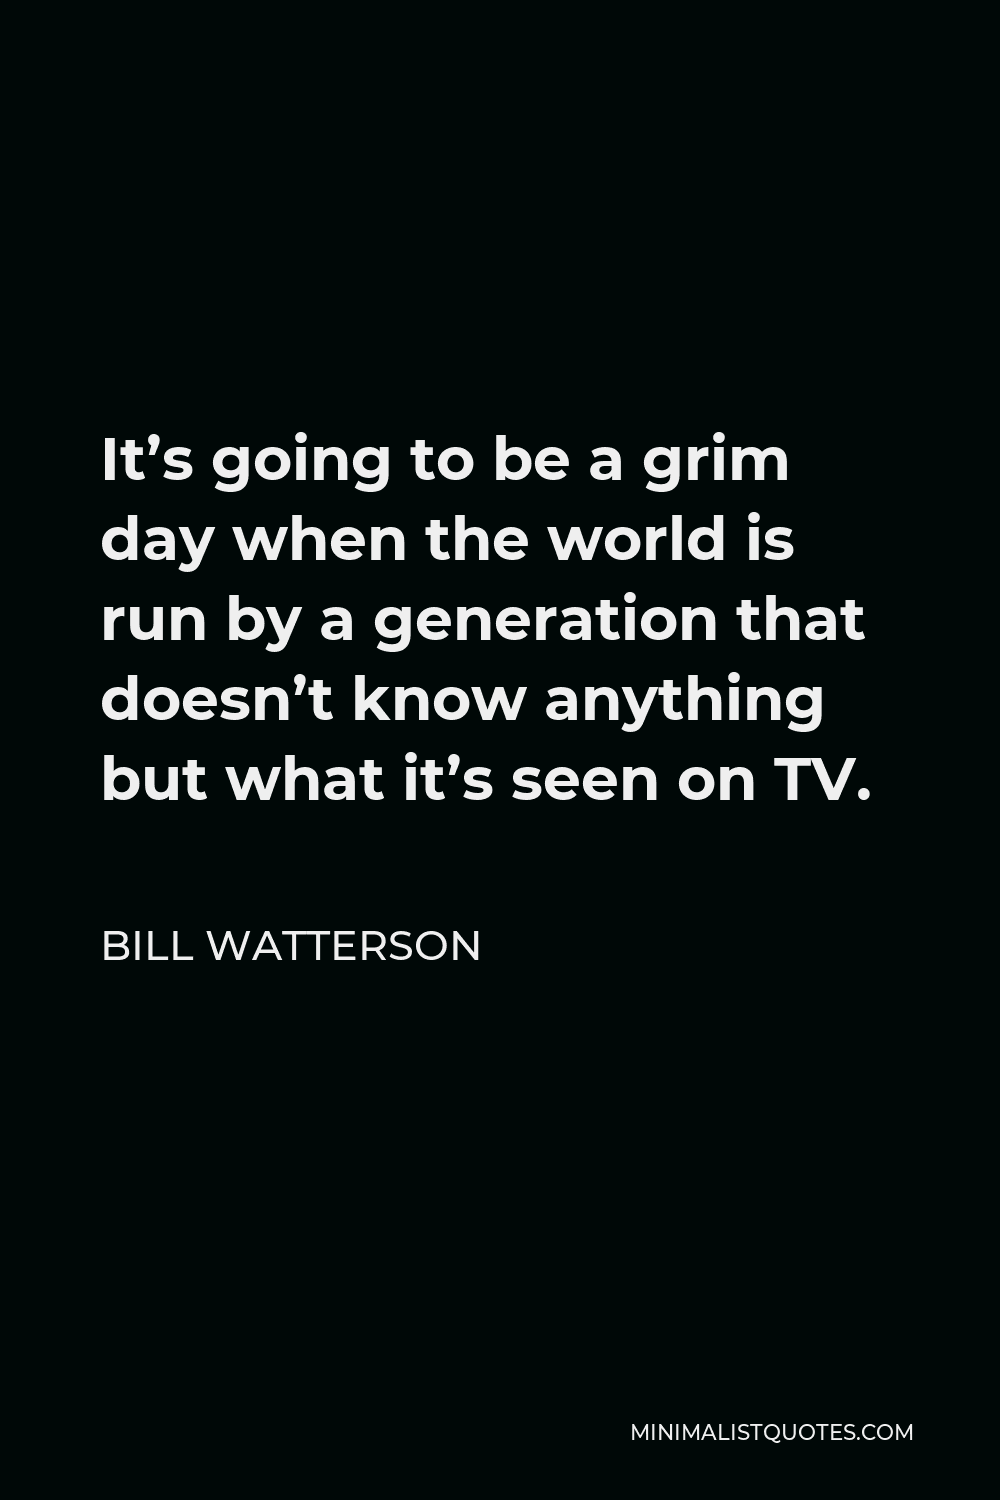 Bill Watterson Quote - It’s going to be a grim day when the world is run by a generation that doesn’t know anything but what it’s seen on TV.